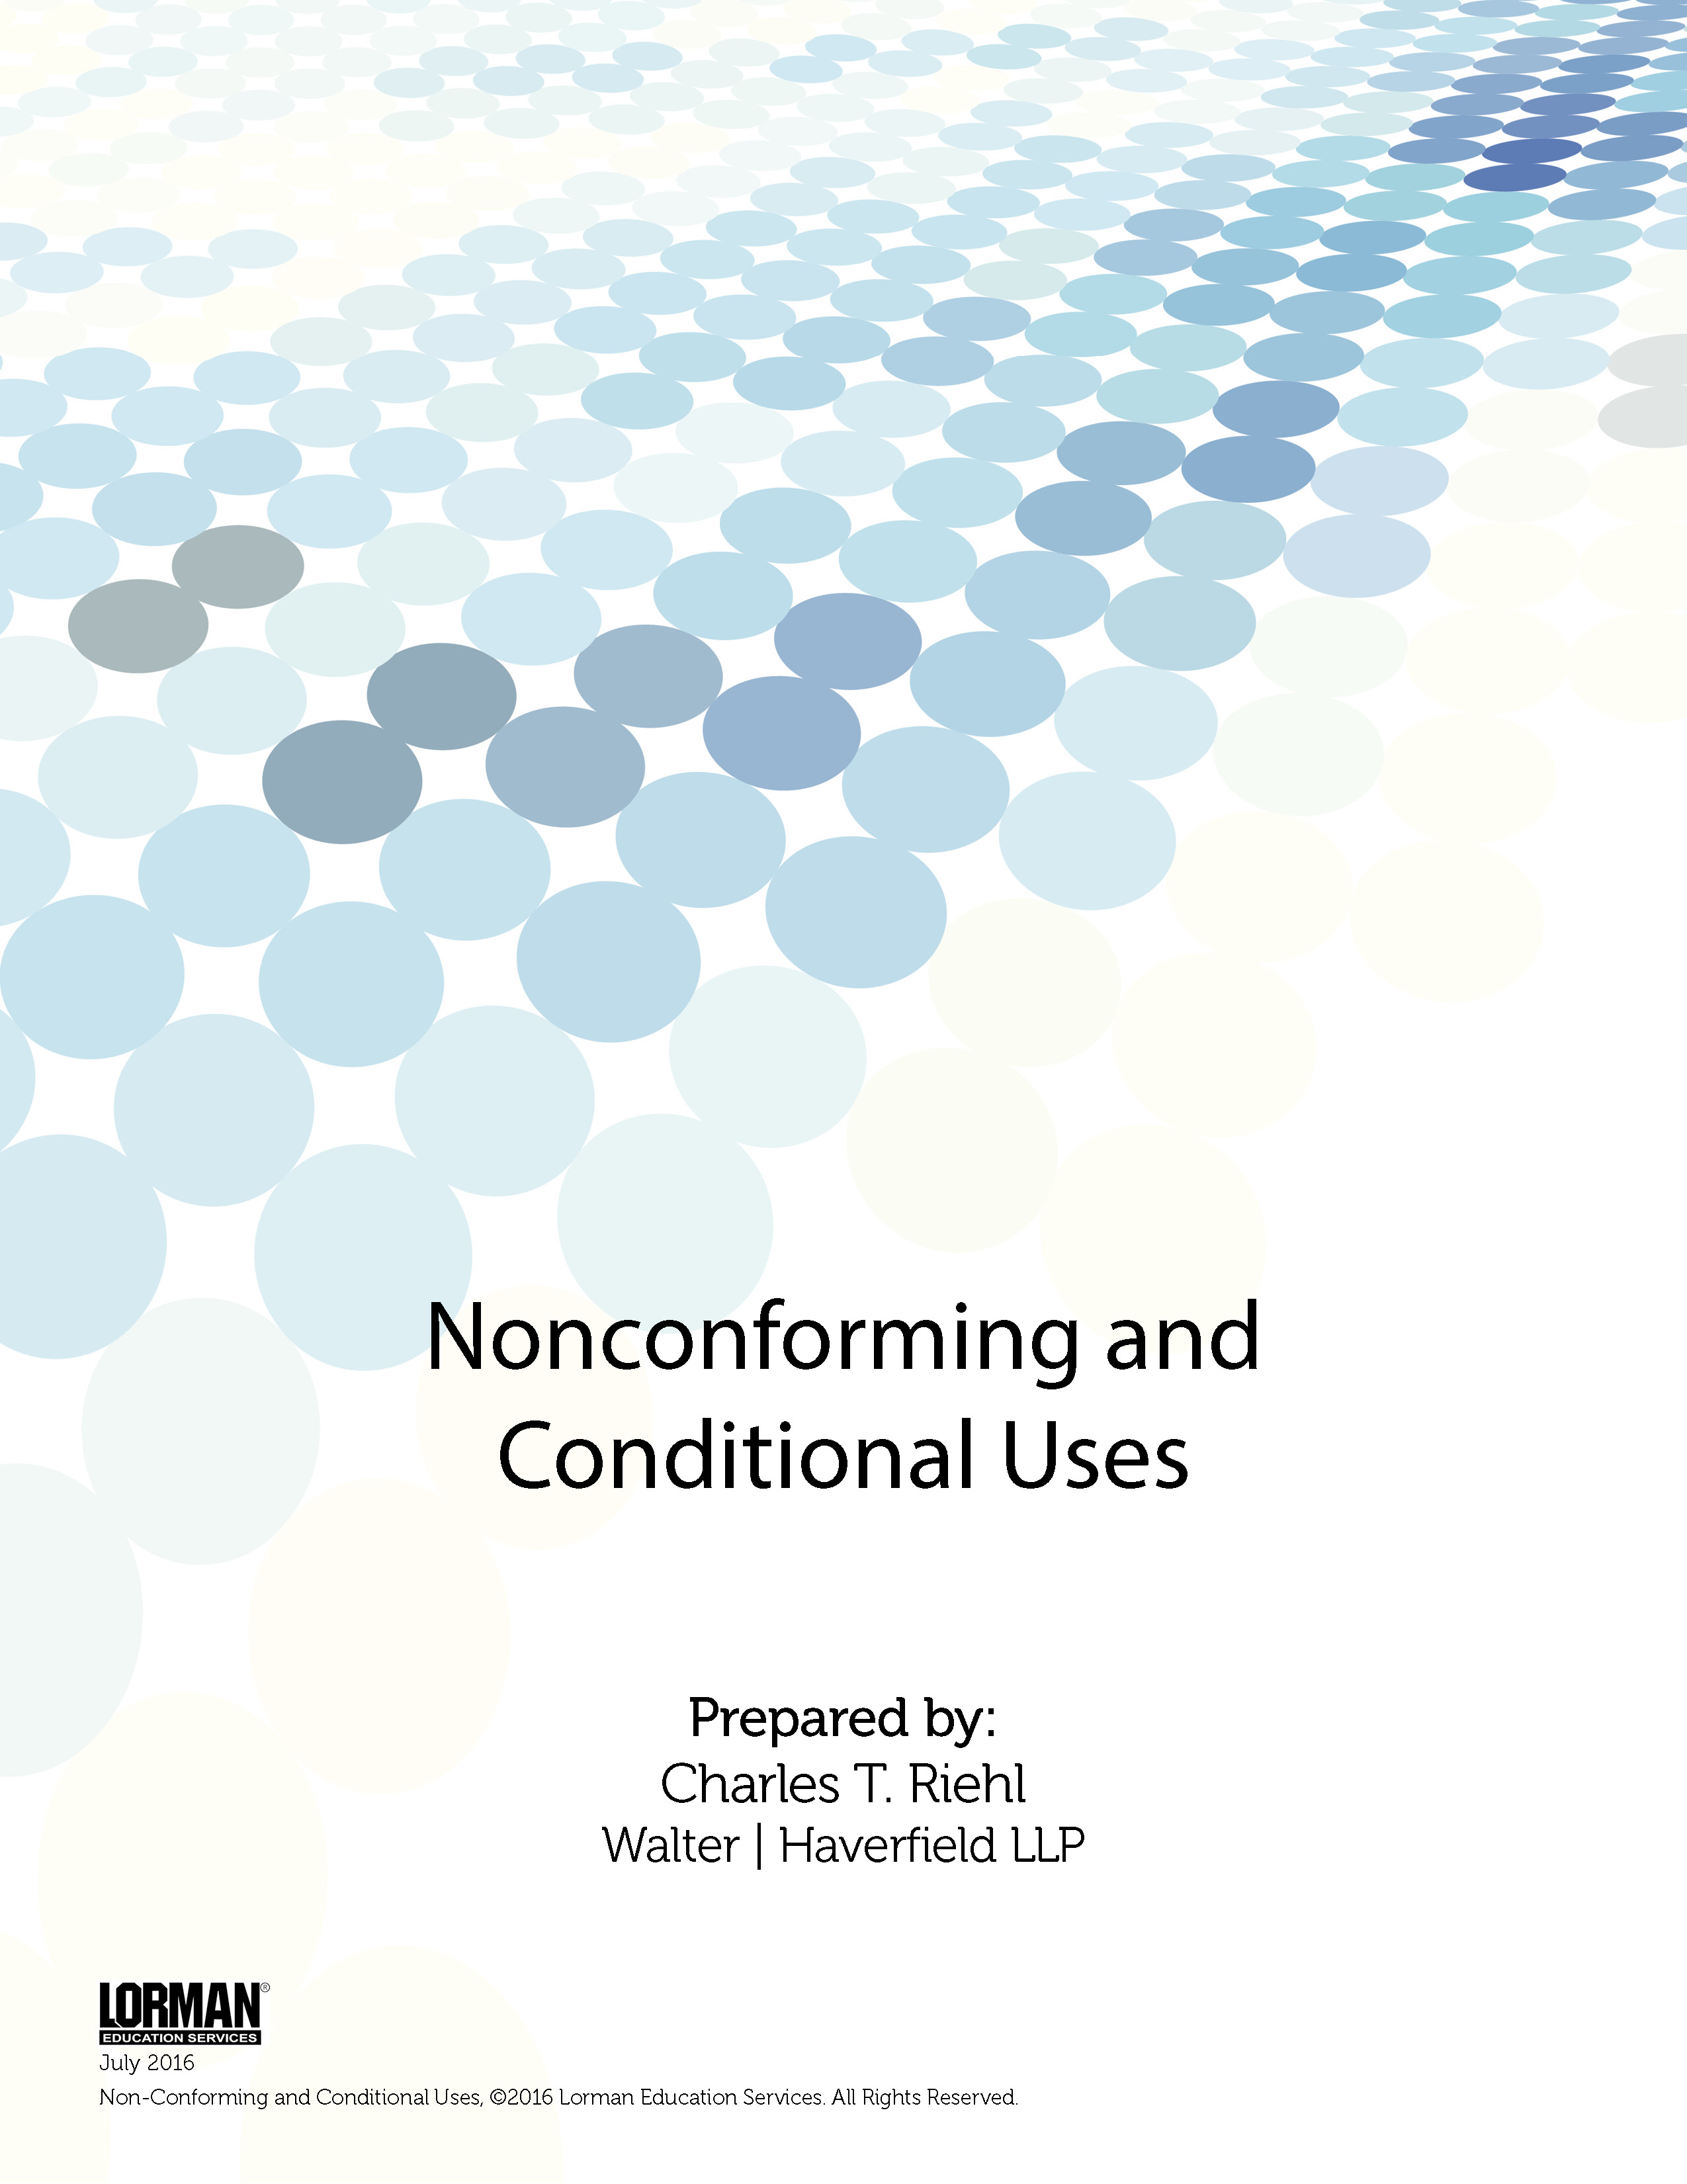 Nonconforming and Conditional Uses